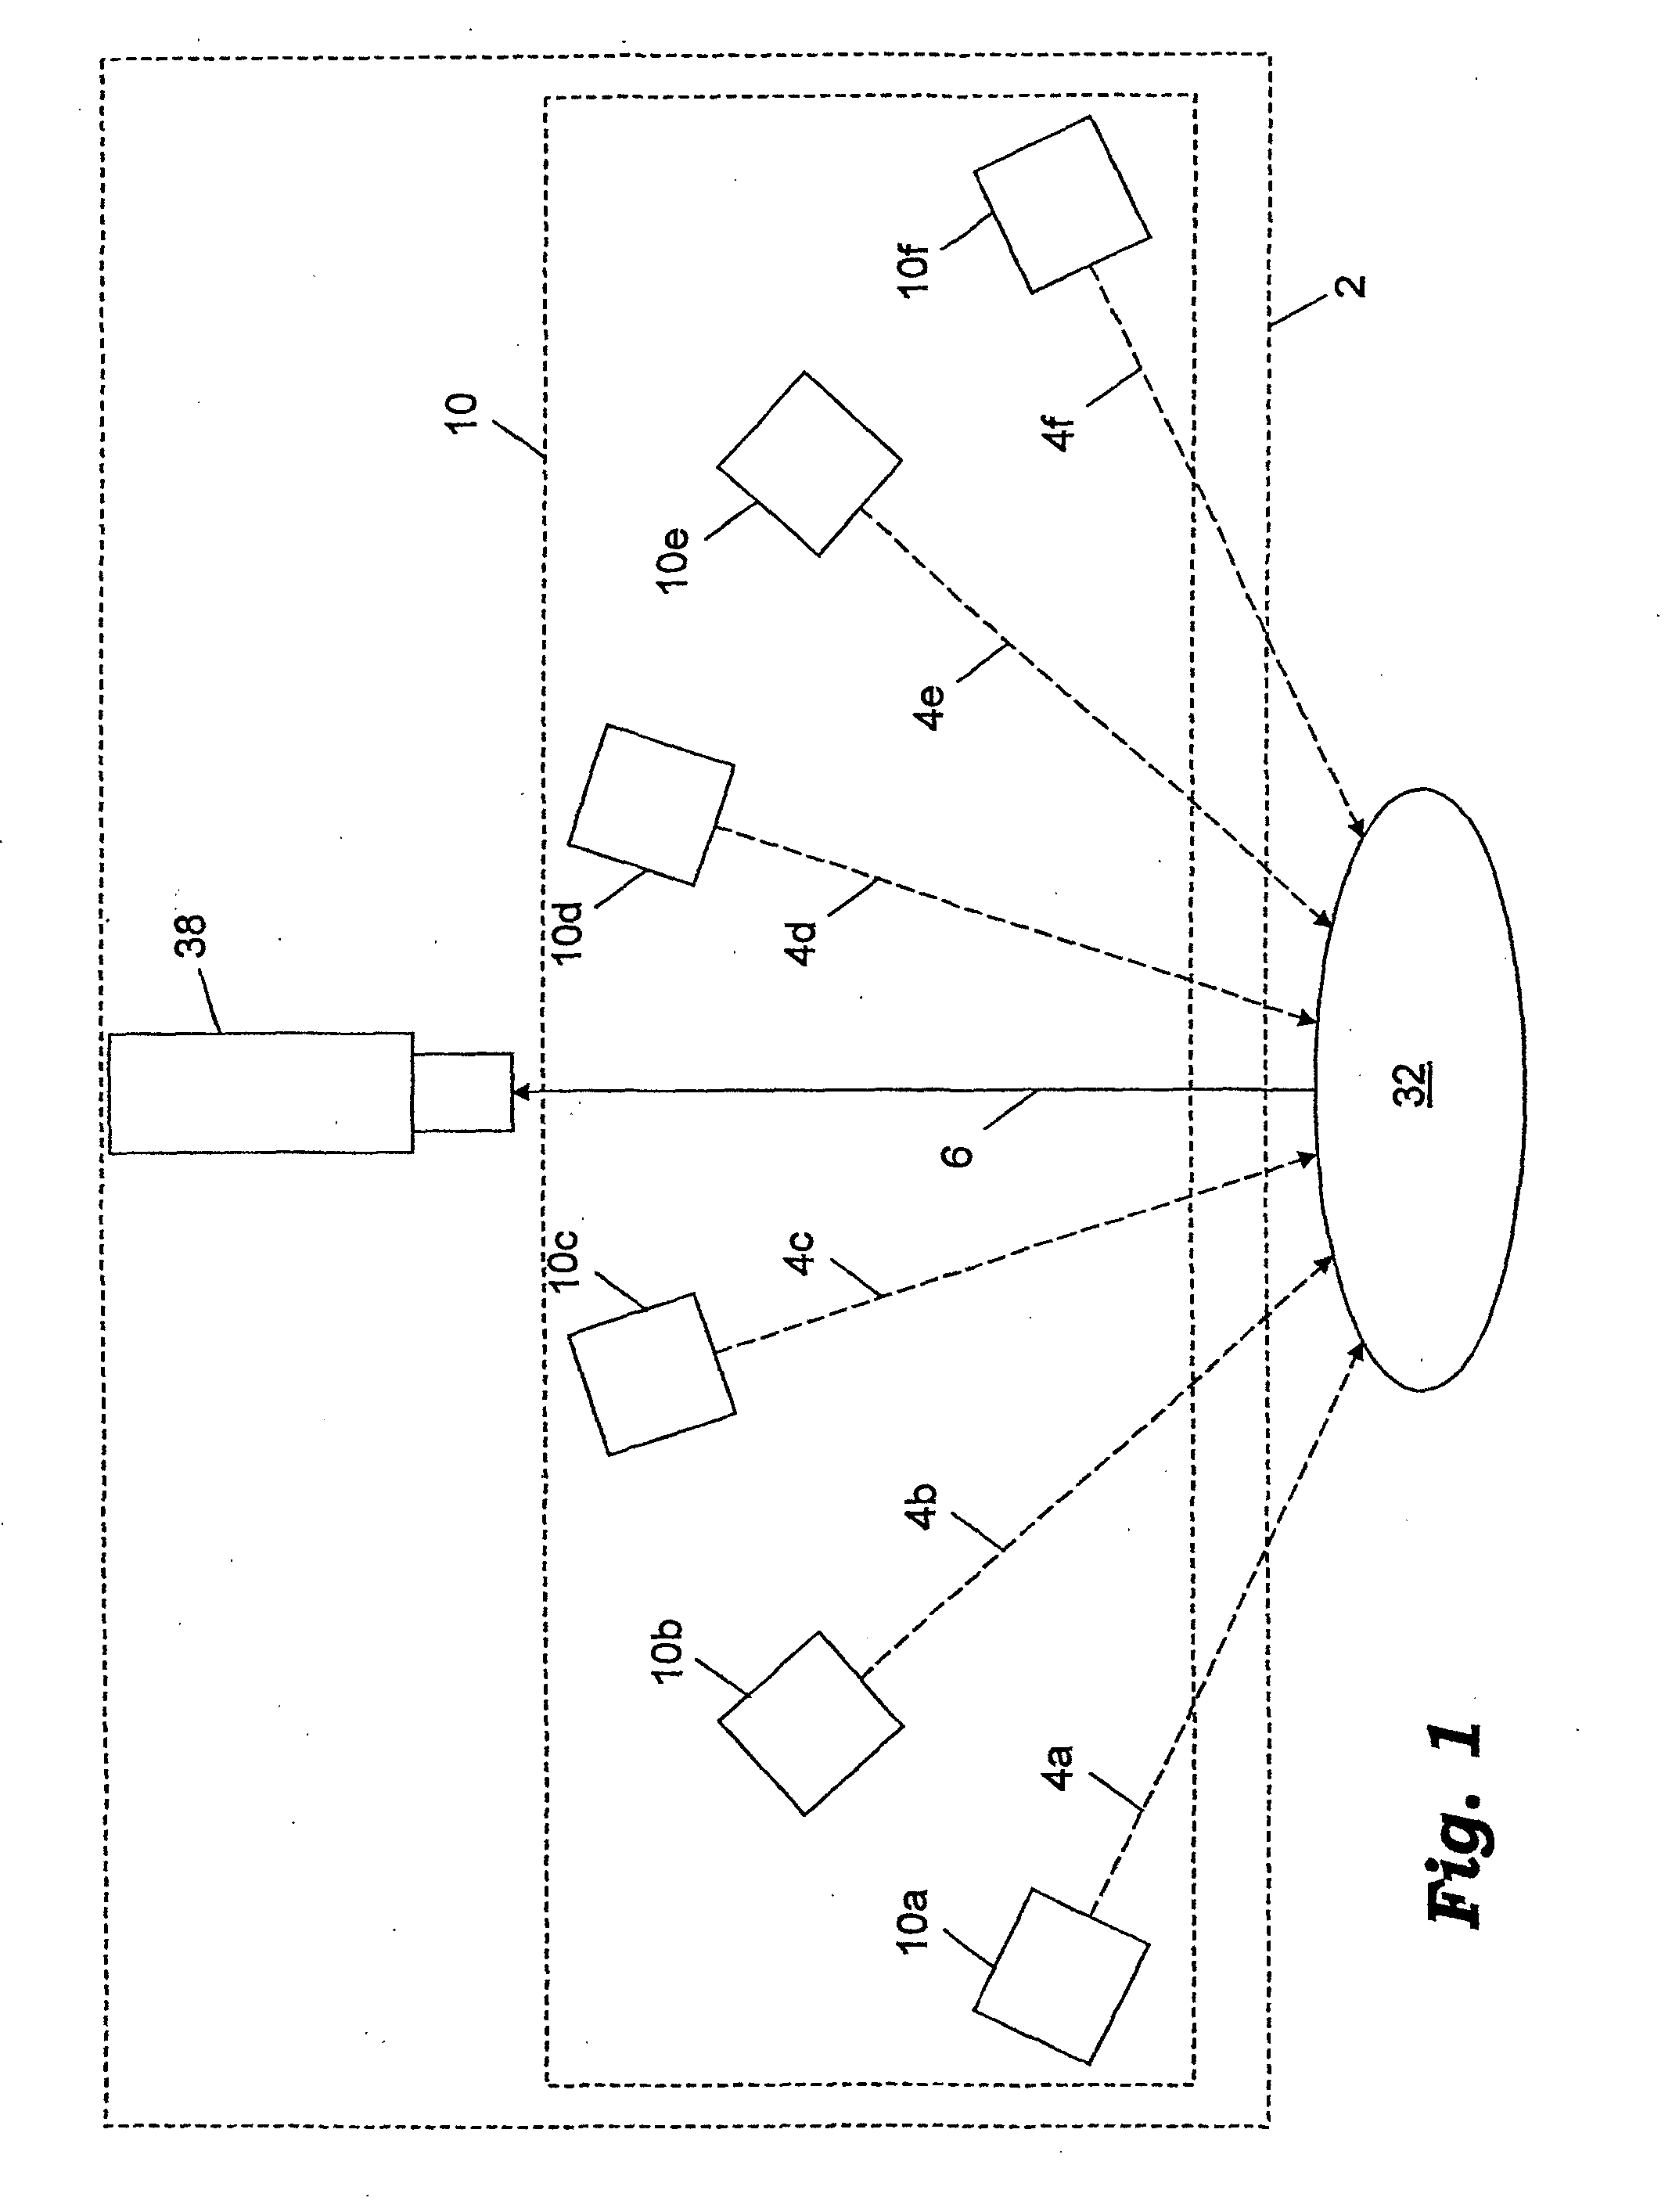 System And Method For Projection of Subsurface Structure Onto An Object's Surface